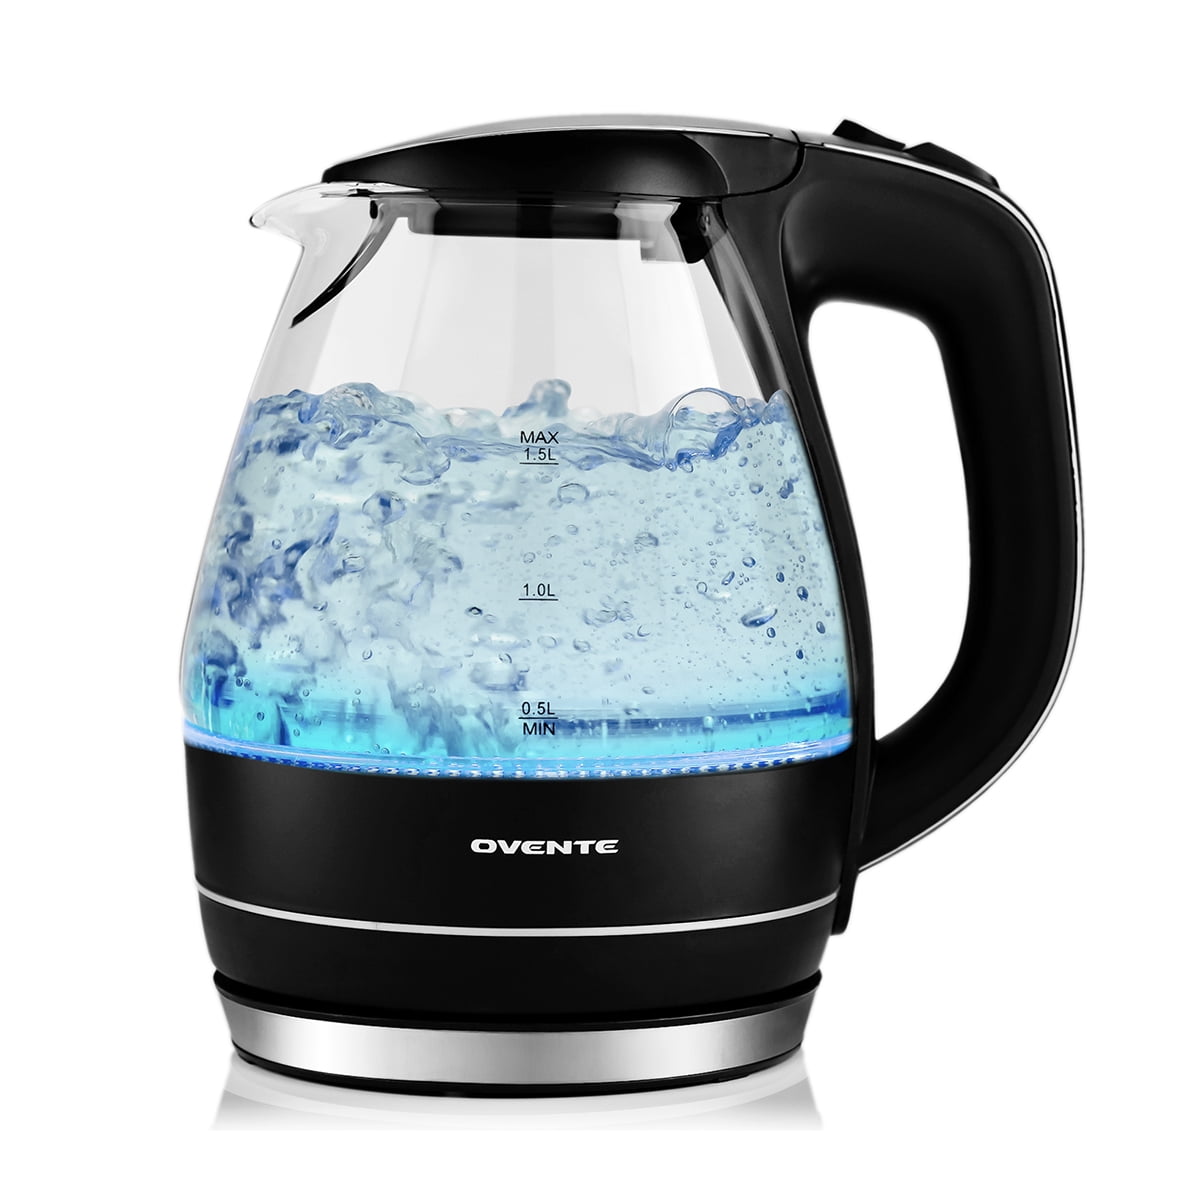 Boiling Water Kettle Image & Photo (Free Trial)